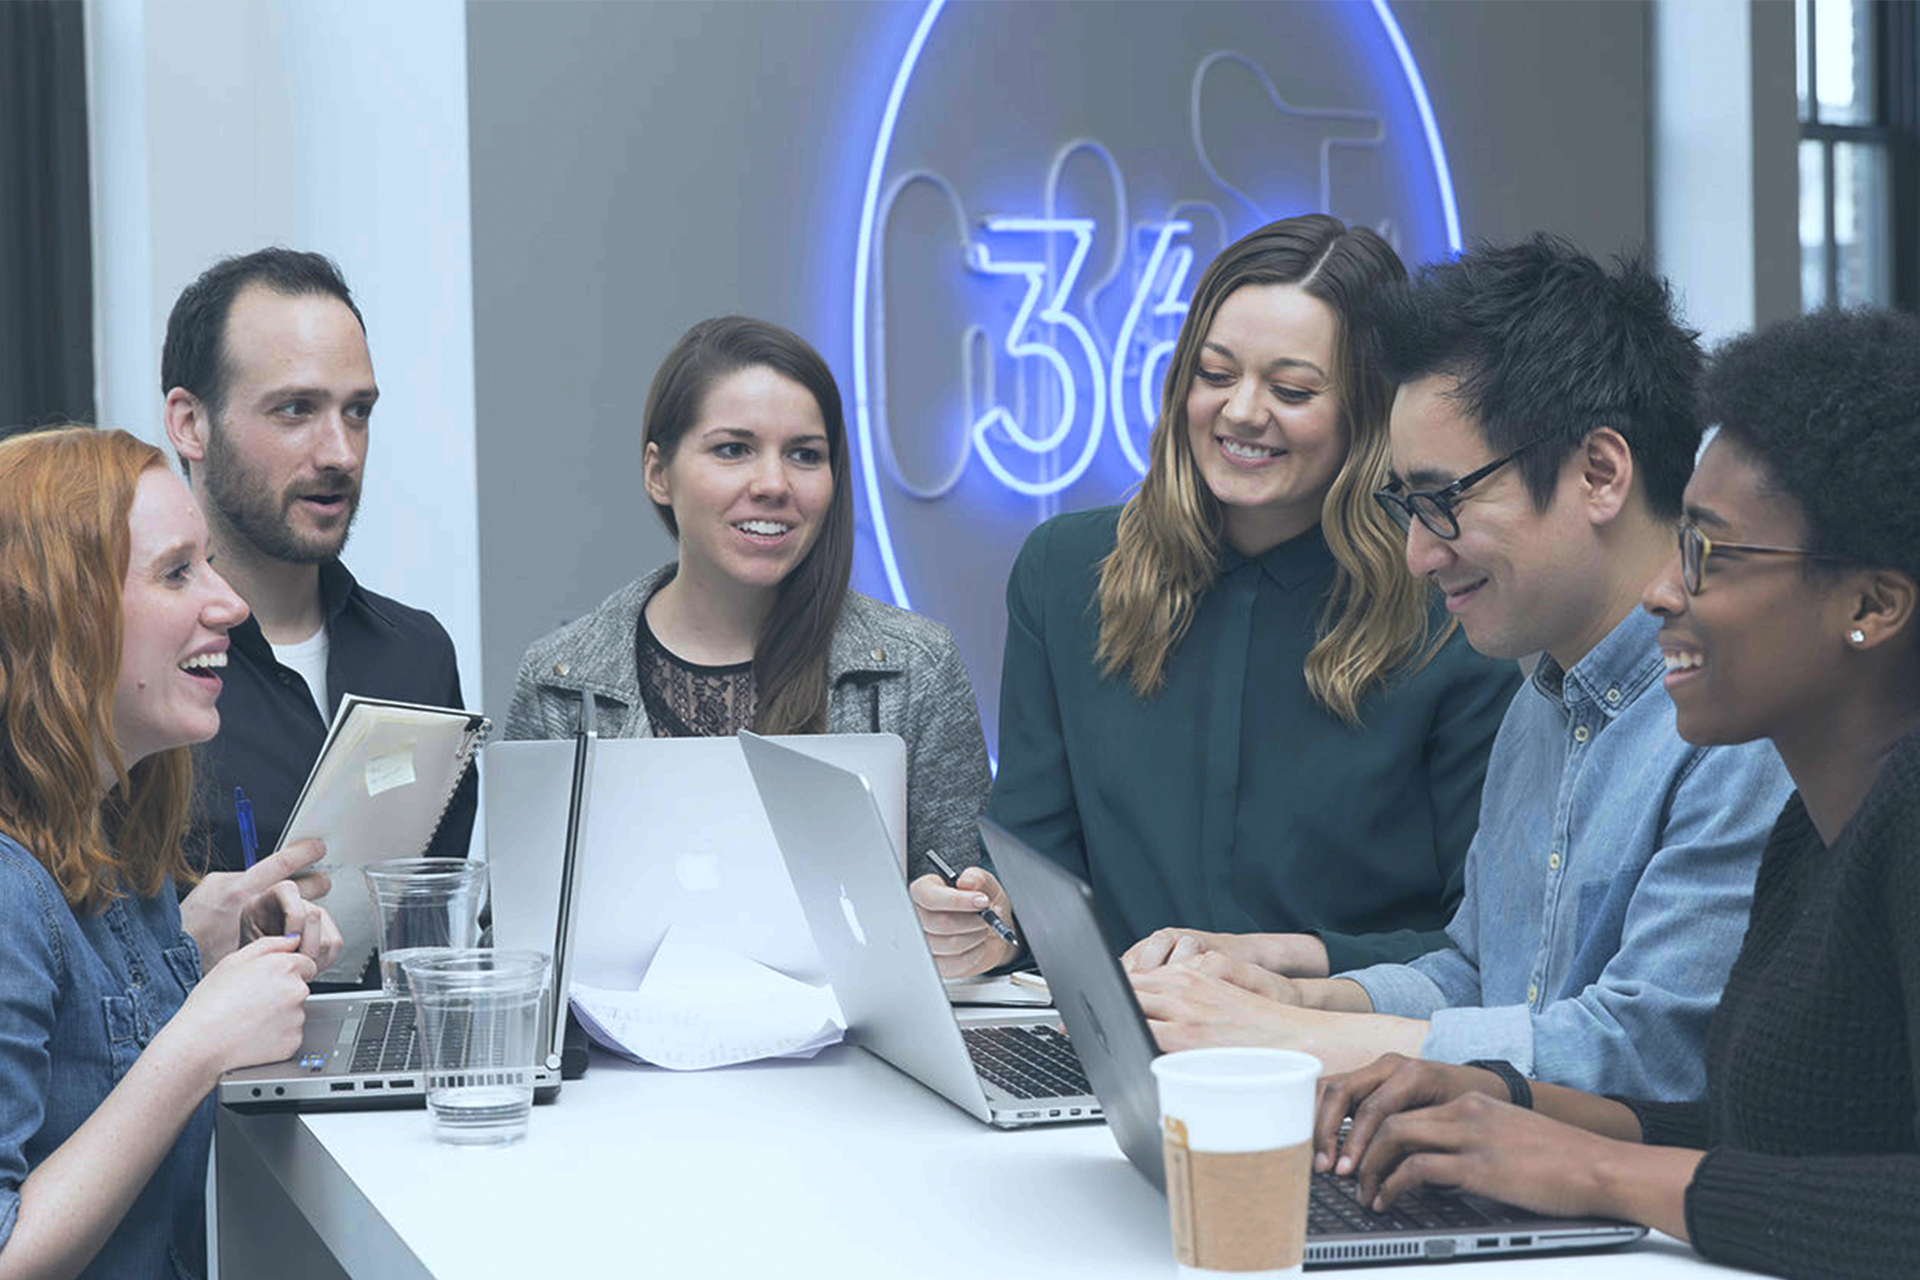 Group of people having a team meeting against the 360i logo